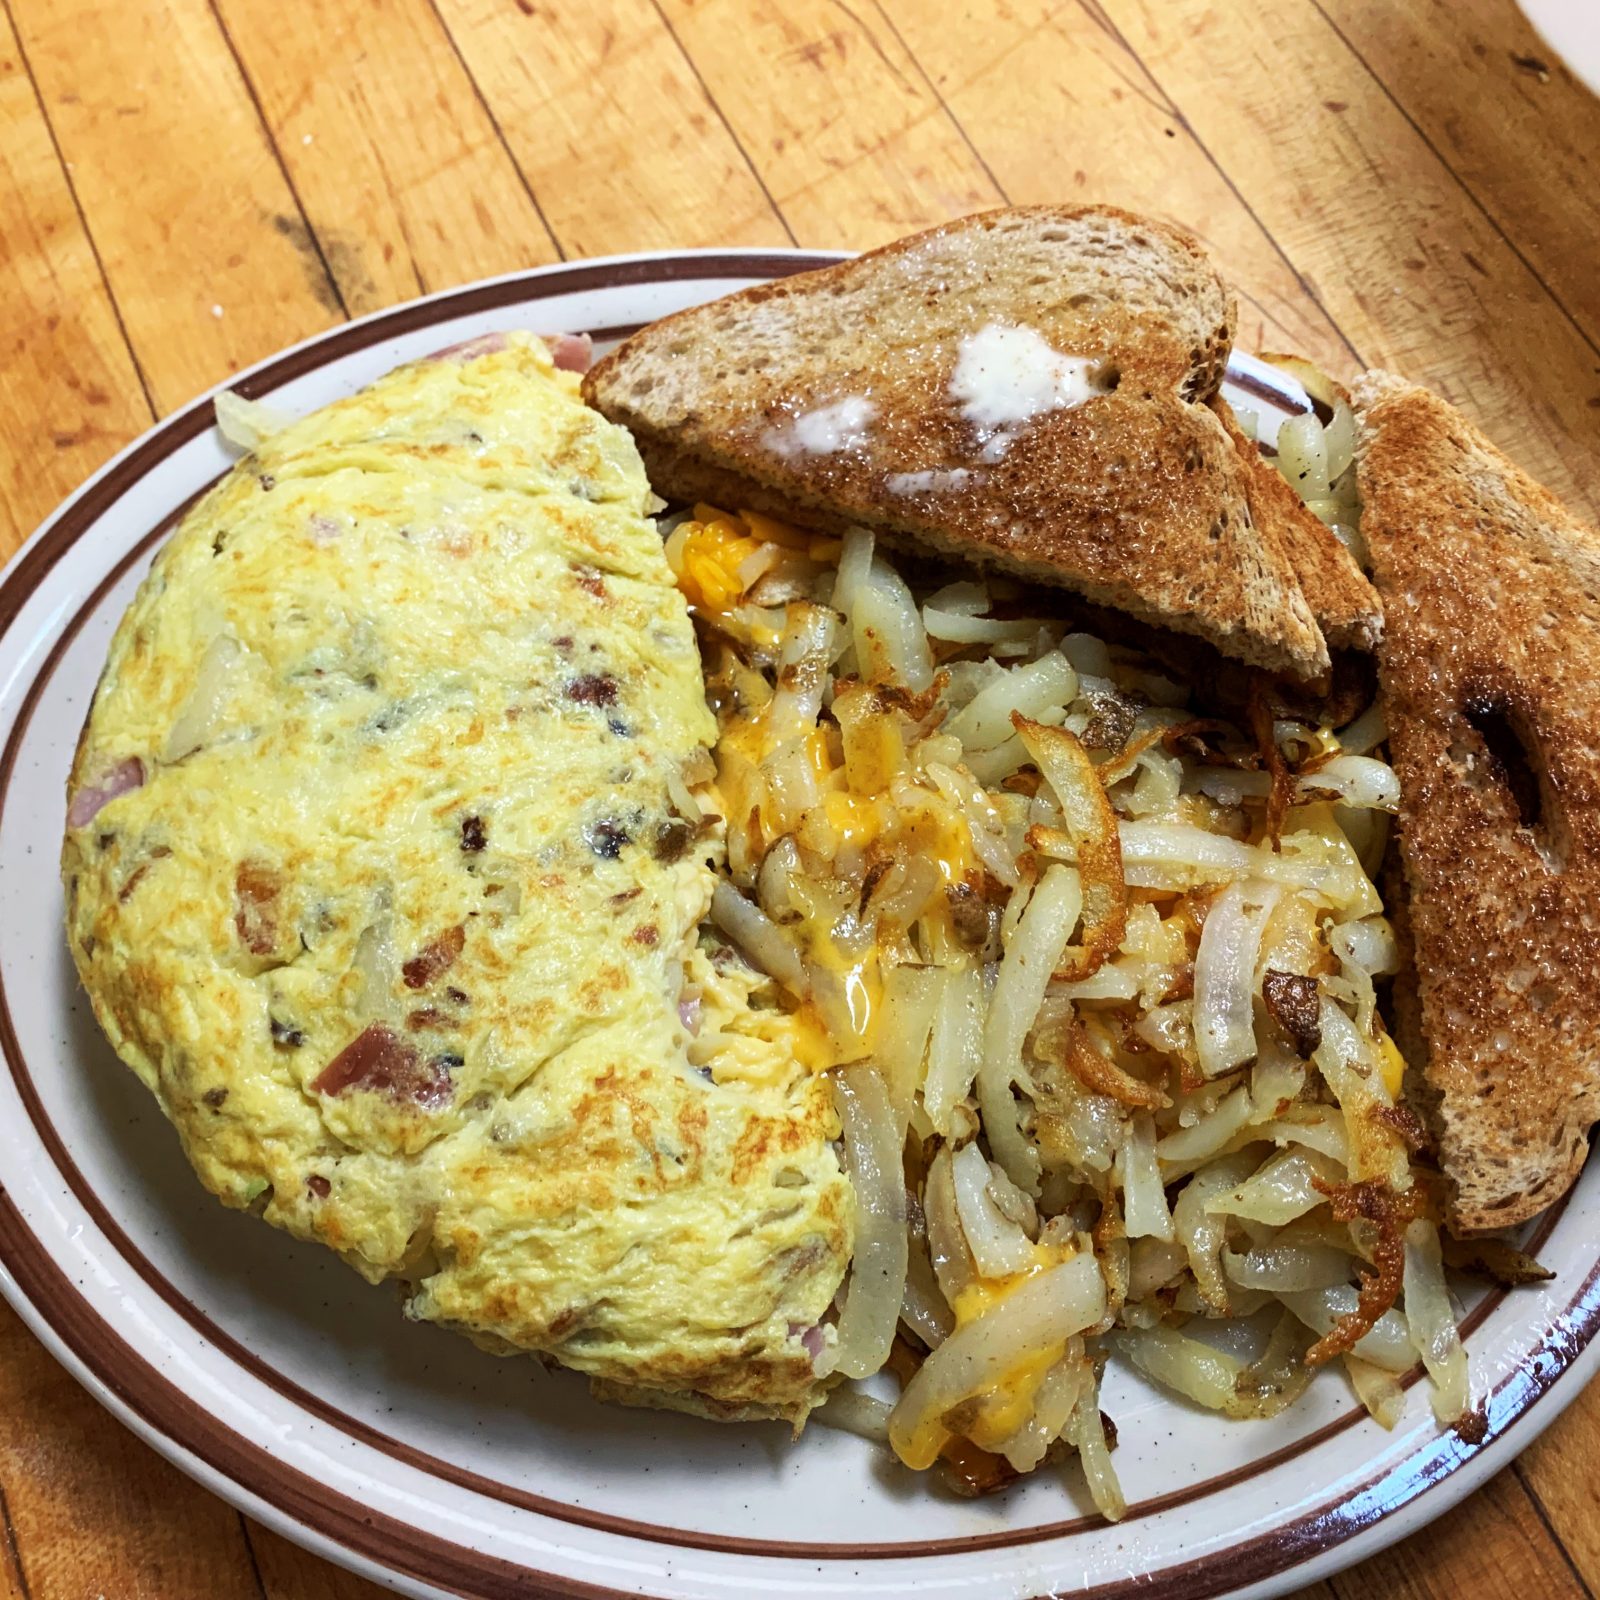 A plate with an omelet and toast.